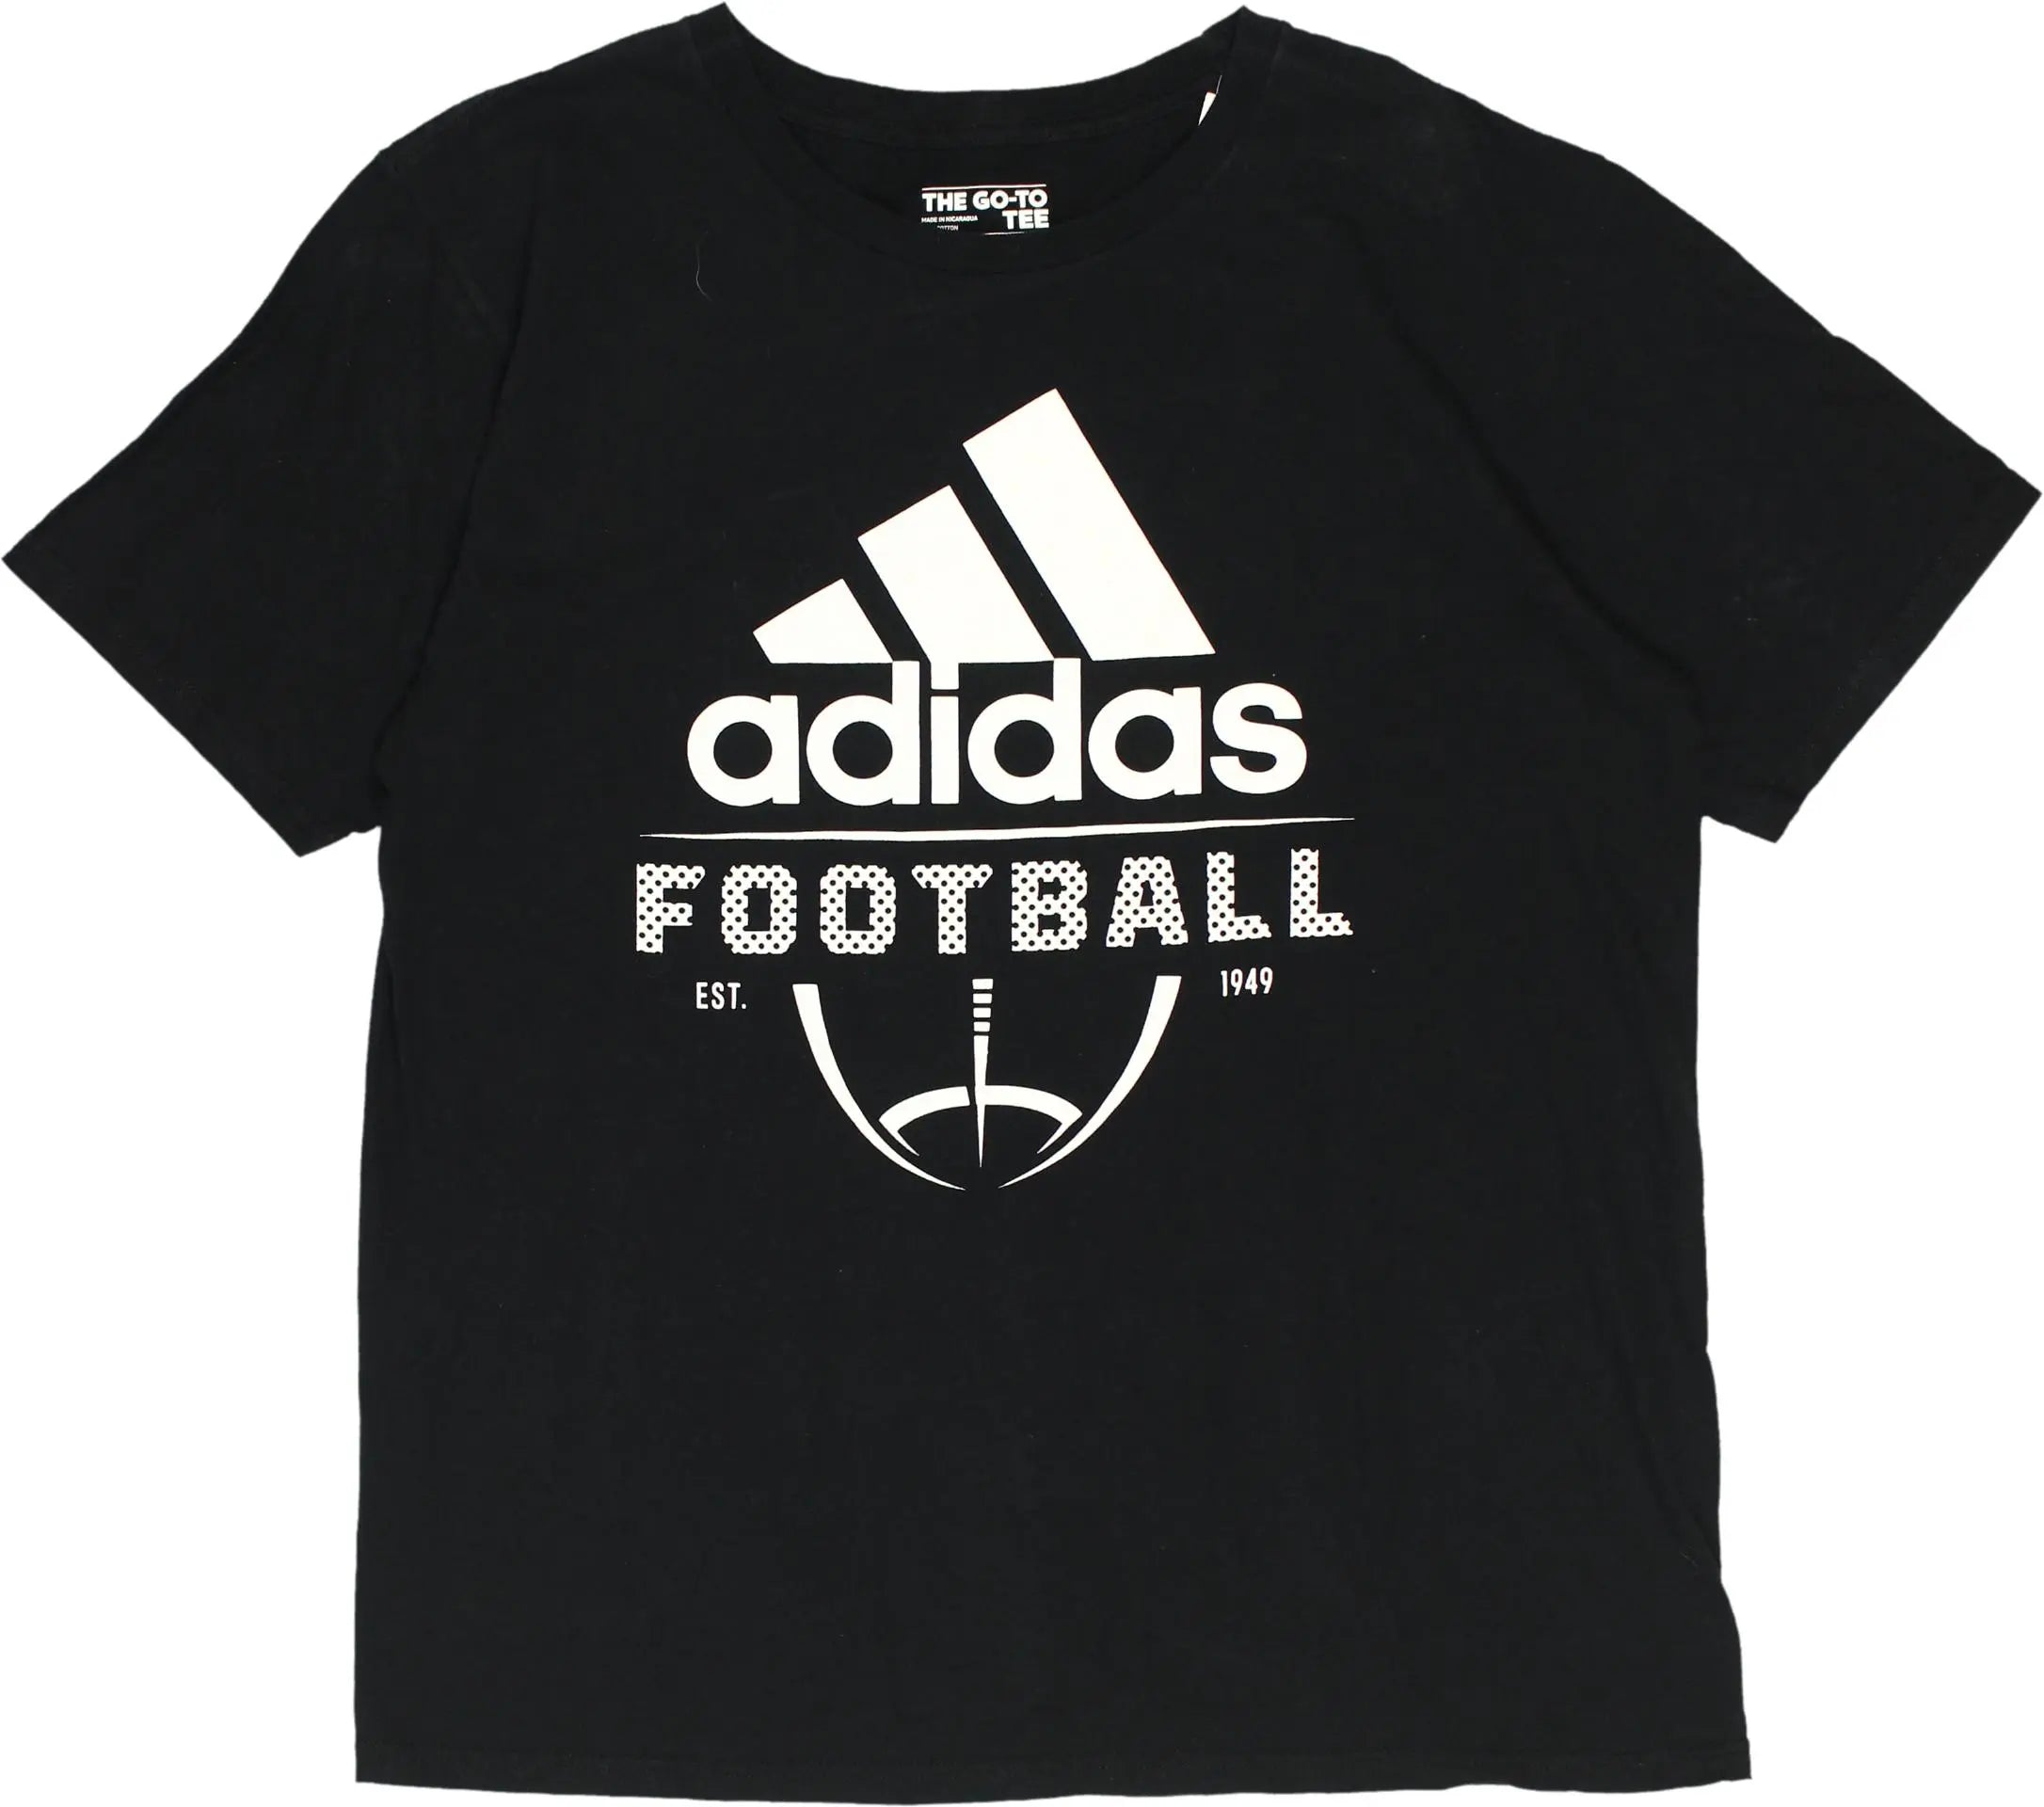 Adidas - T-shirt- ThriftTale.com - Vintage and second handclothing